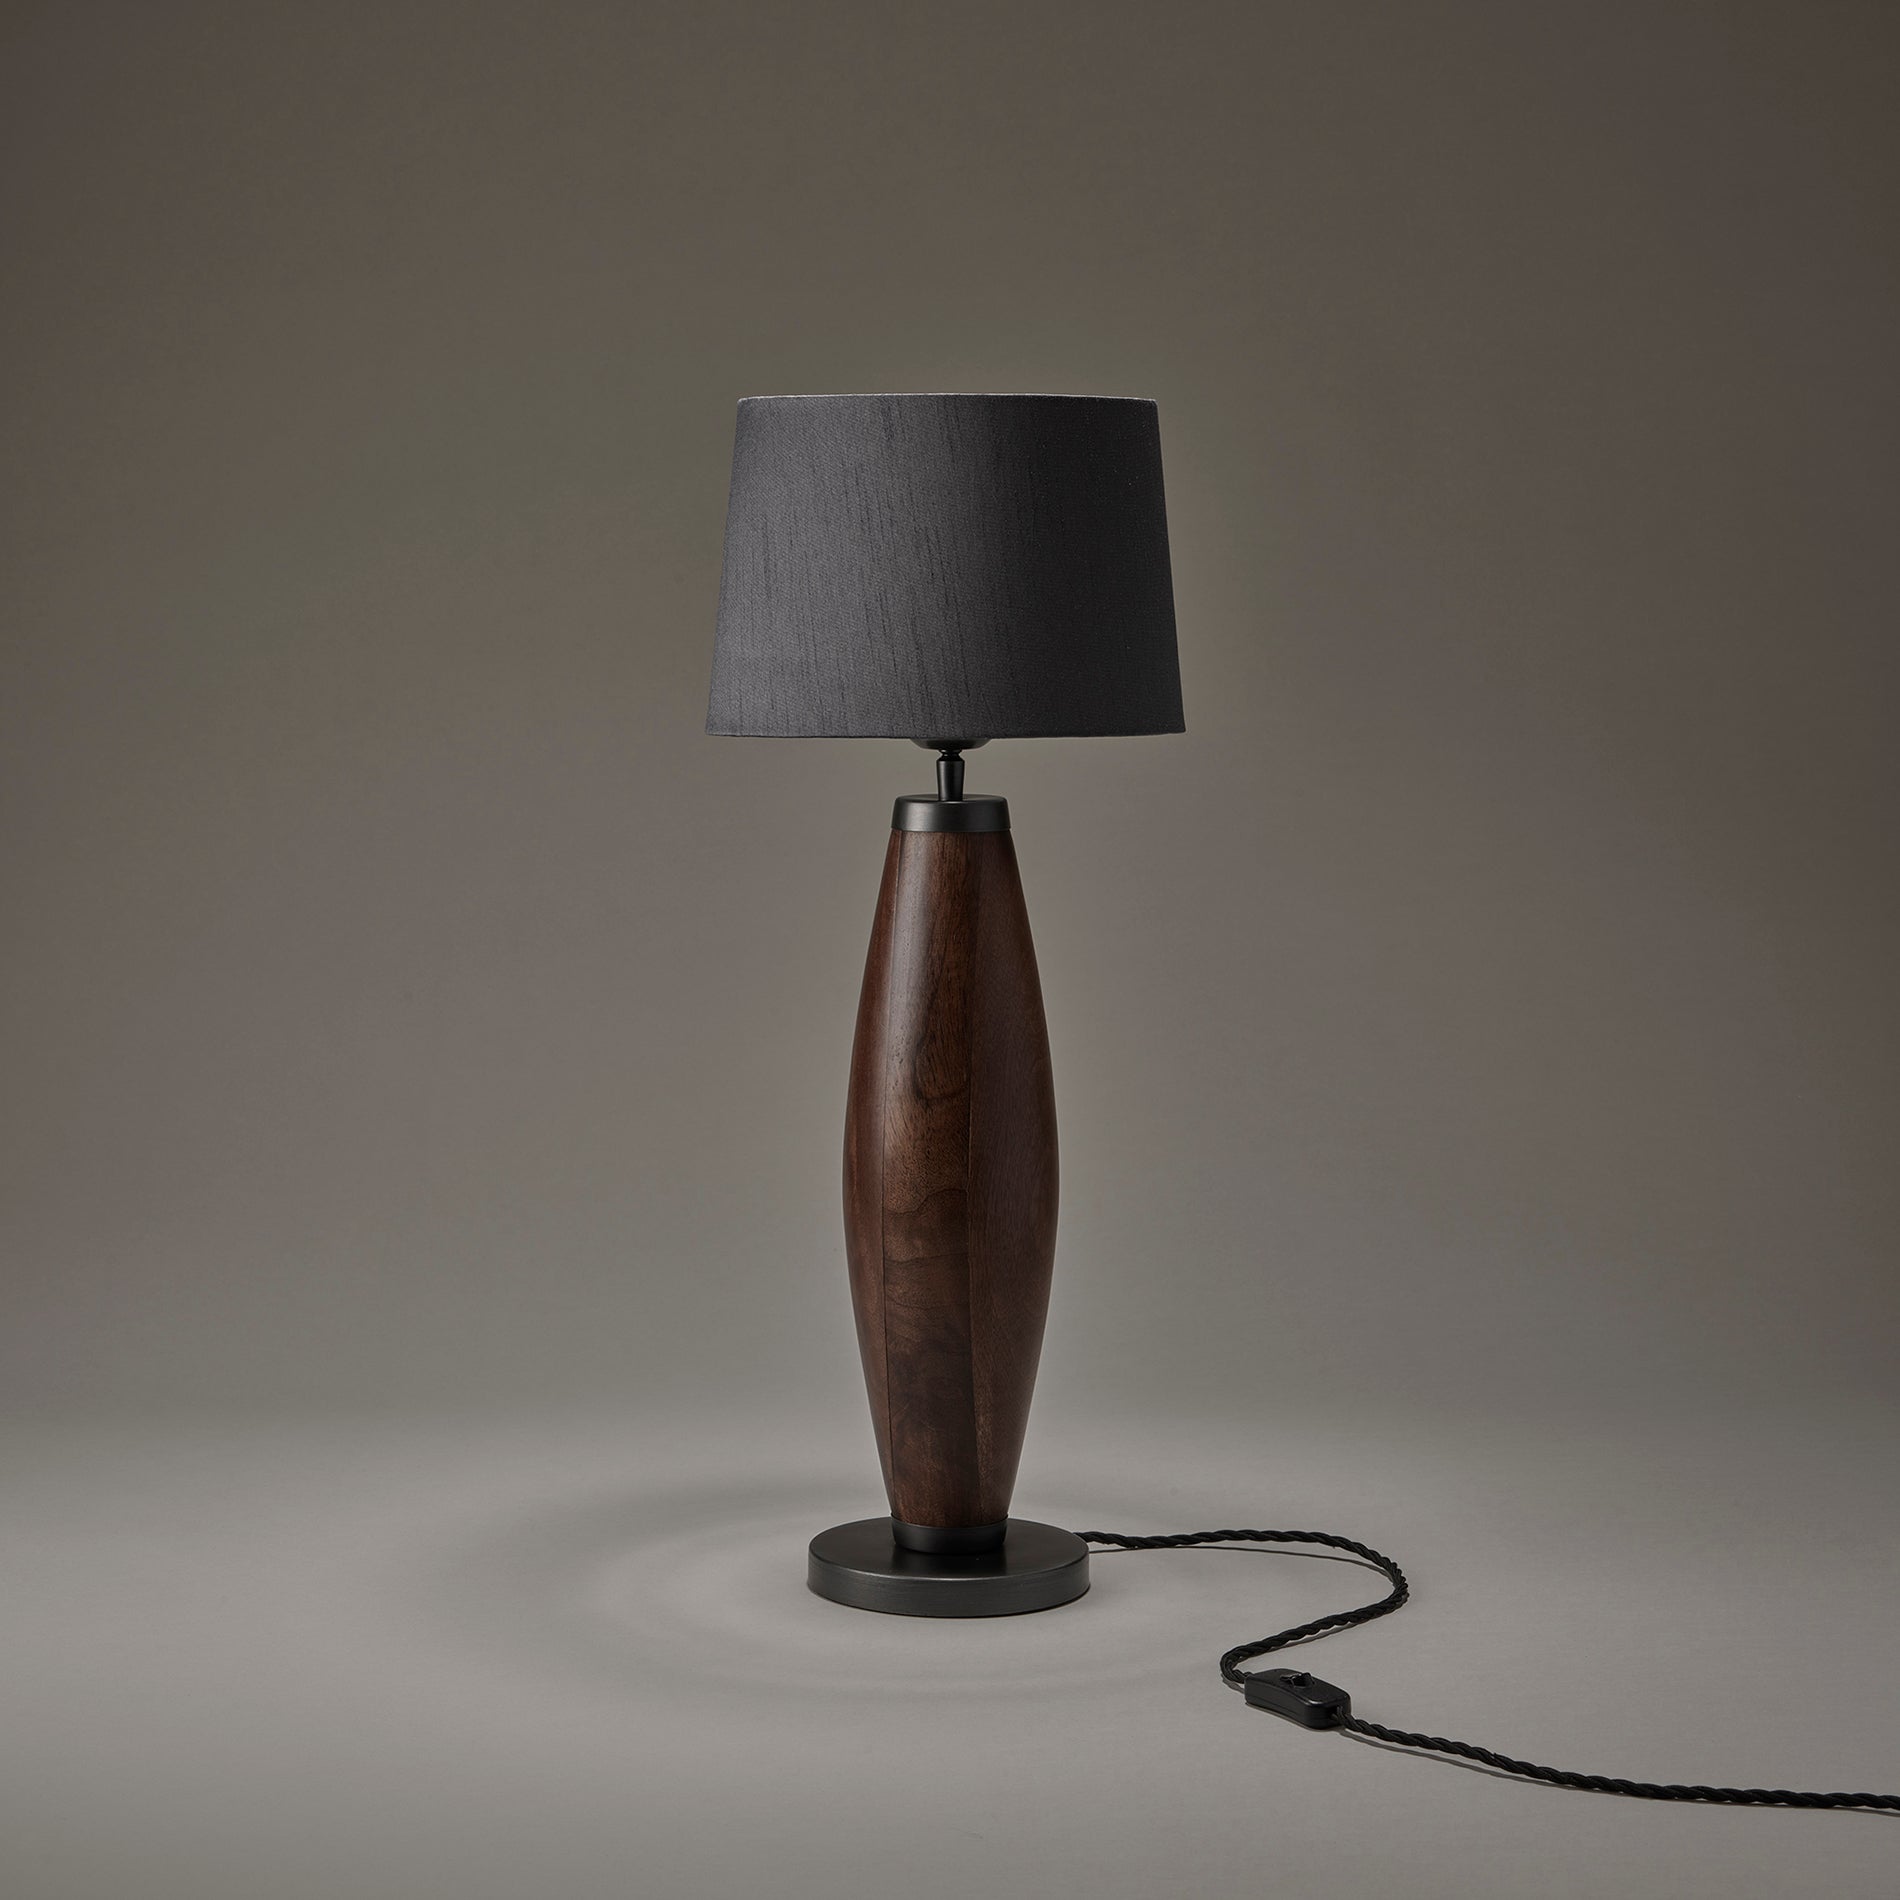 wooden geometric pillar table lamp in black with small empire lampshade in grey